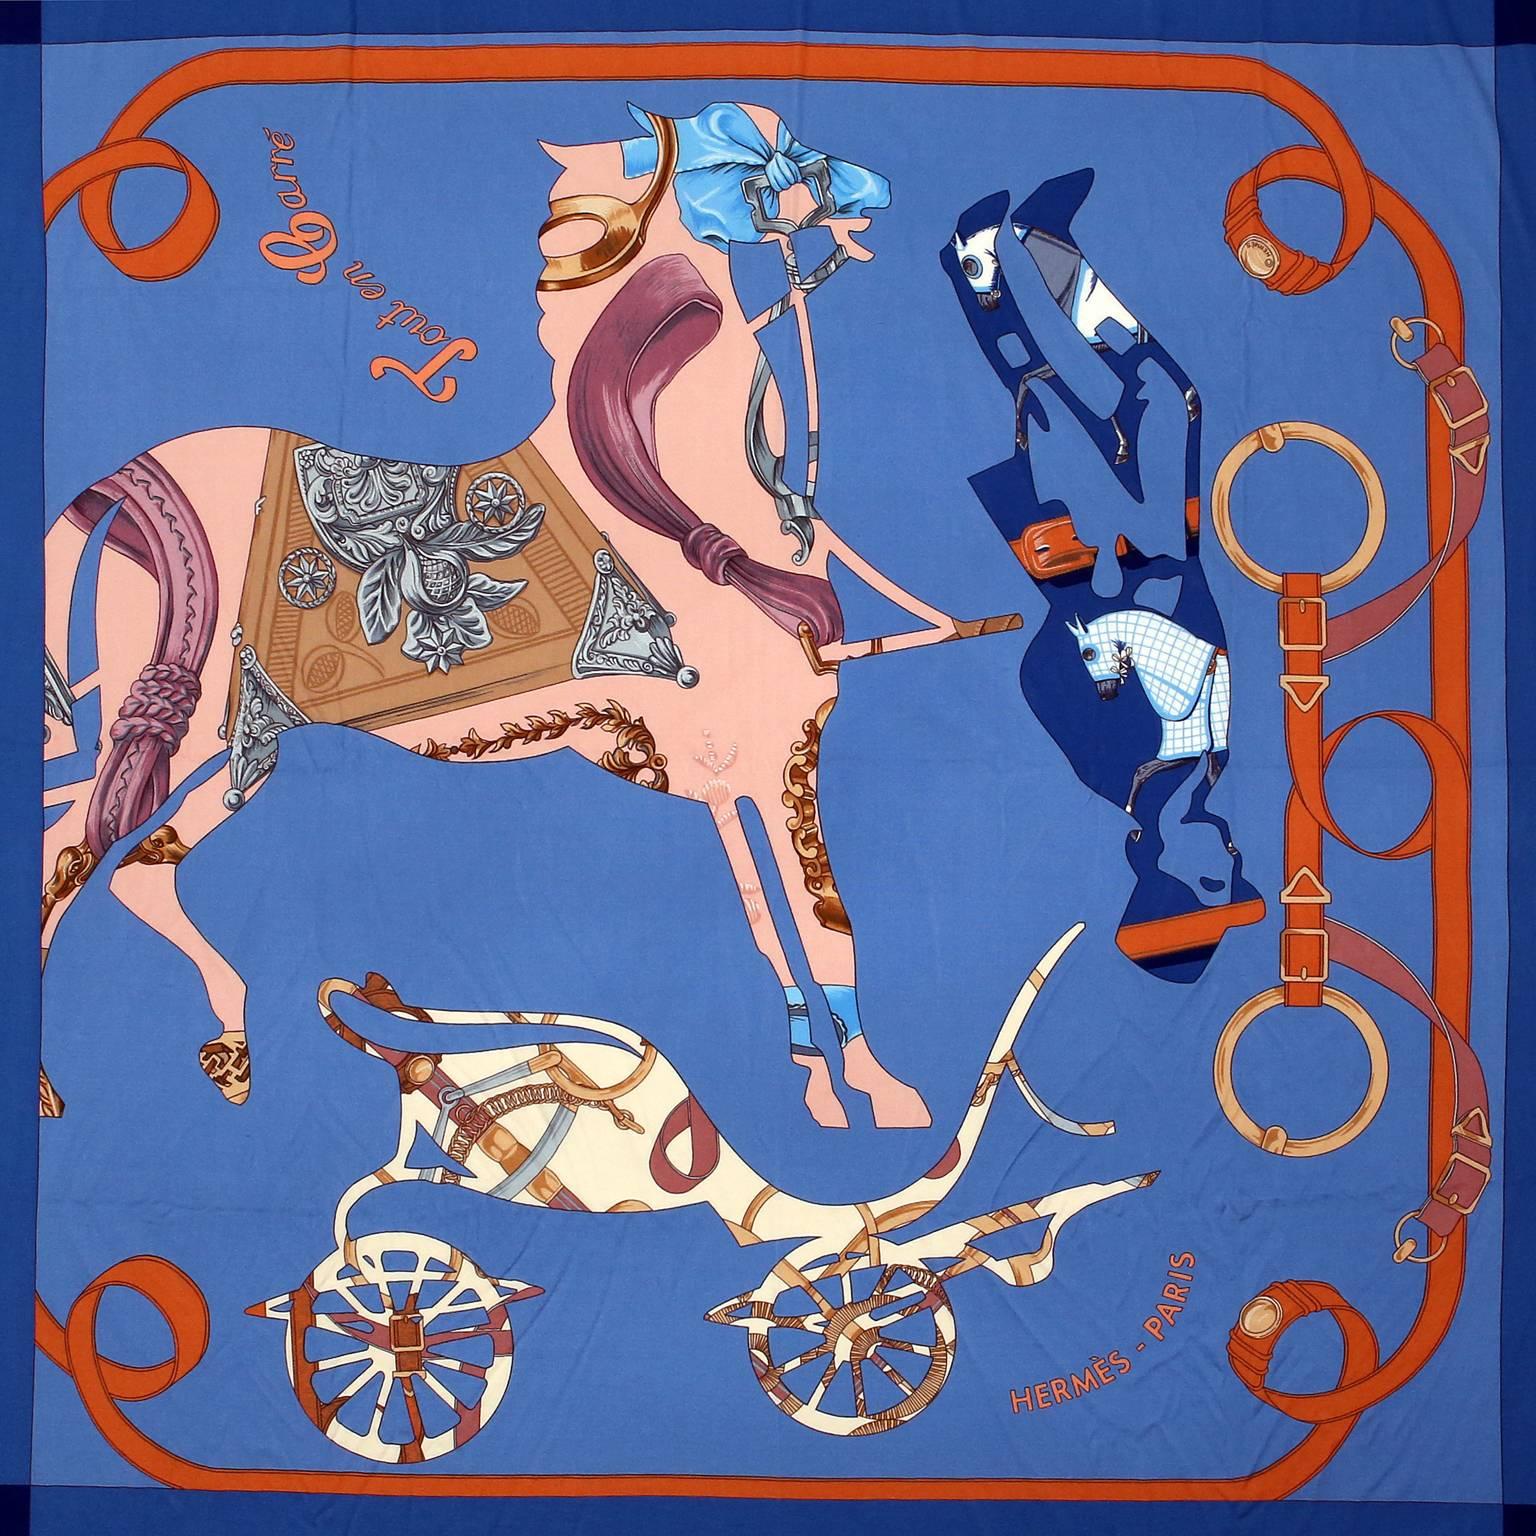 Hermès Tout en Carre Blue Elastique Silk Scarf- PRISTINE
  Designed by Bali Barret and first issued in 2006.  Reissued 2009/ 2010.
Yale blue background is a lovely shade of azure and has a darker border.  Equestrian theme featuring a horse, carriage